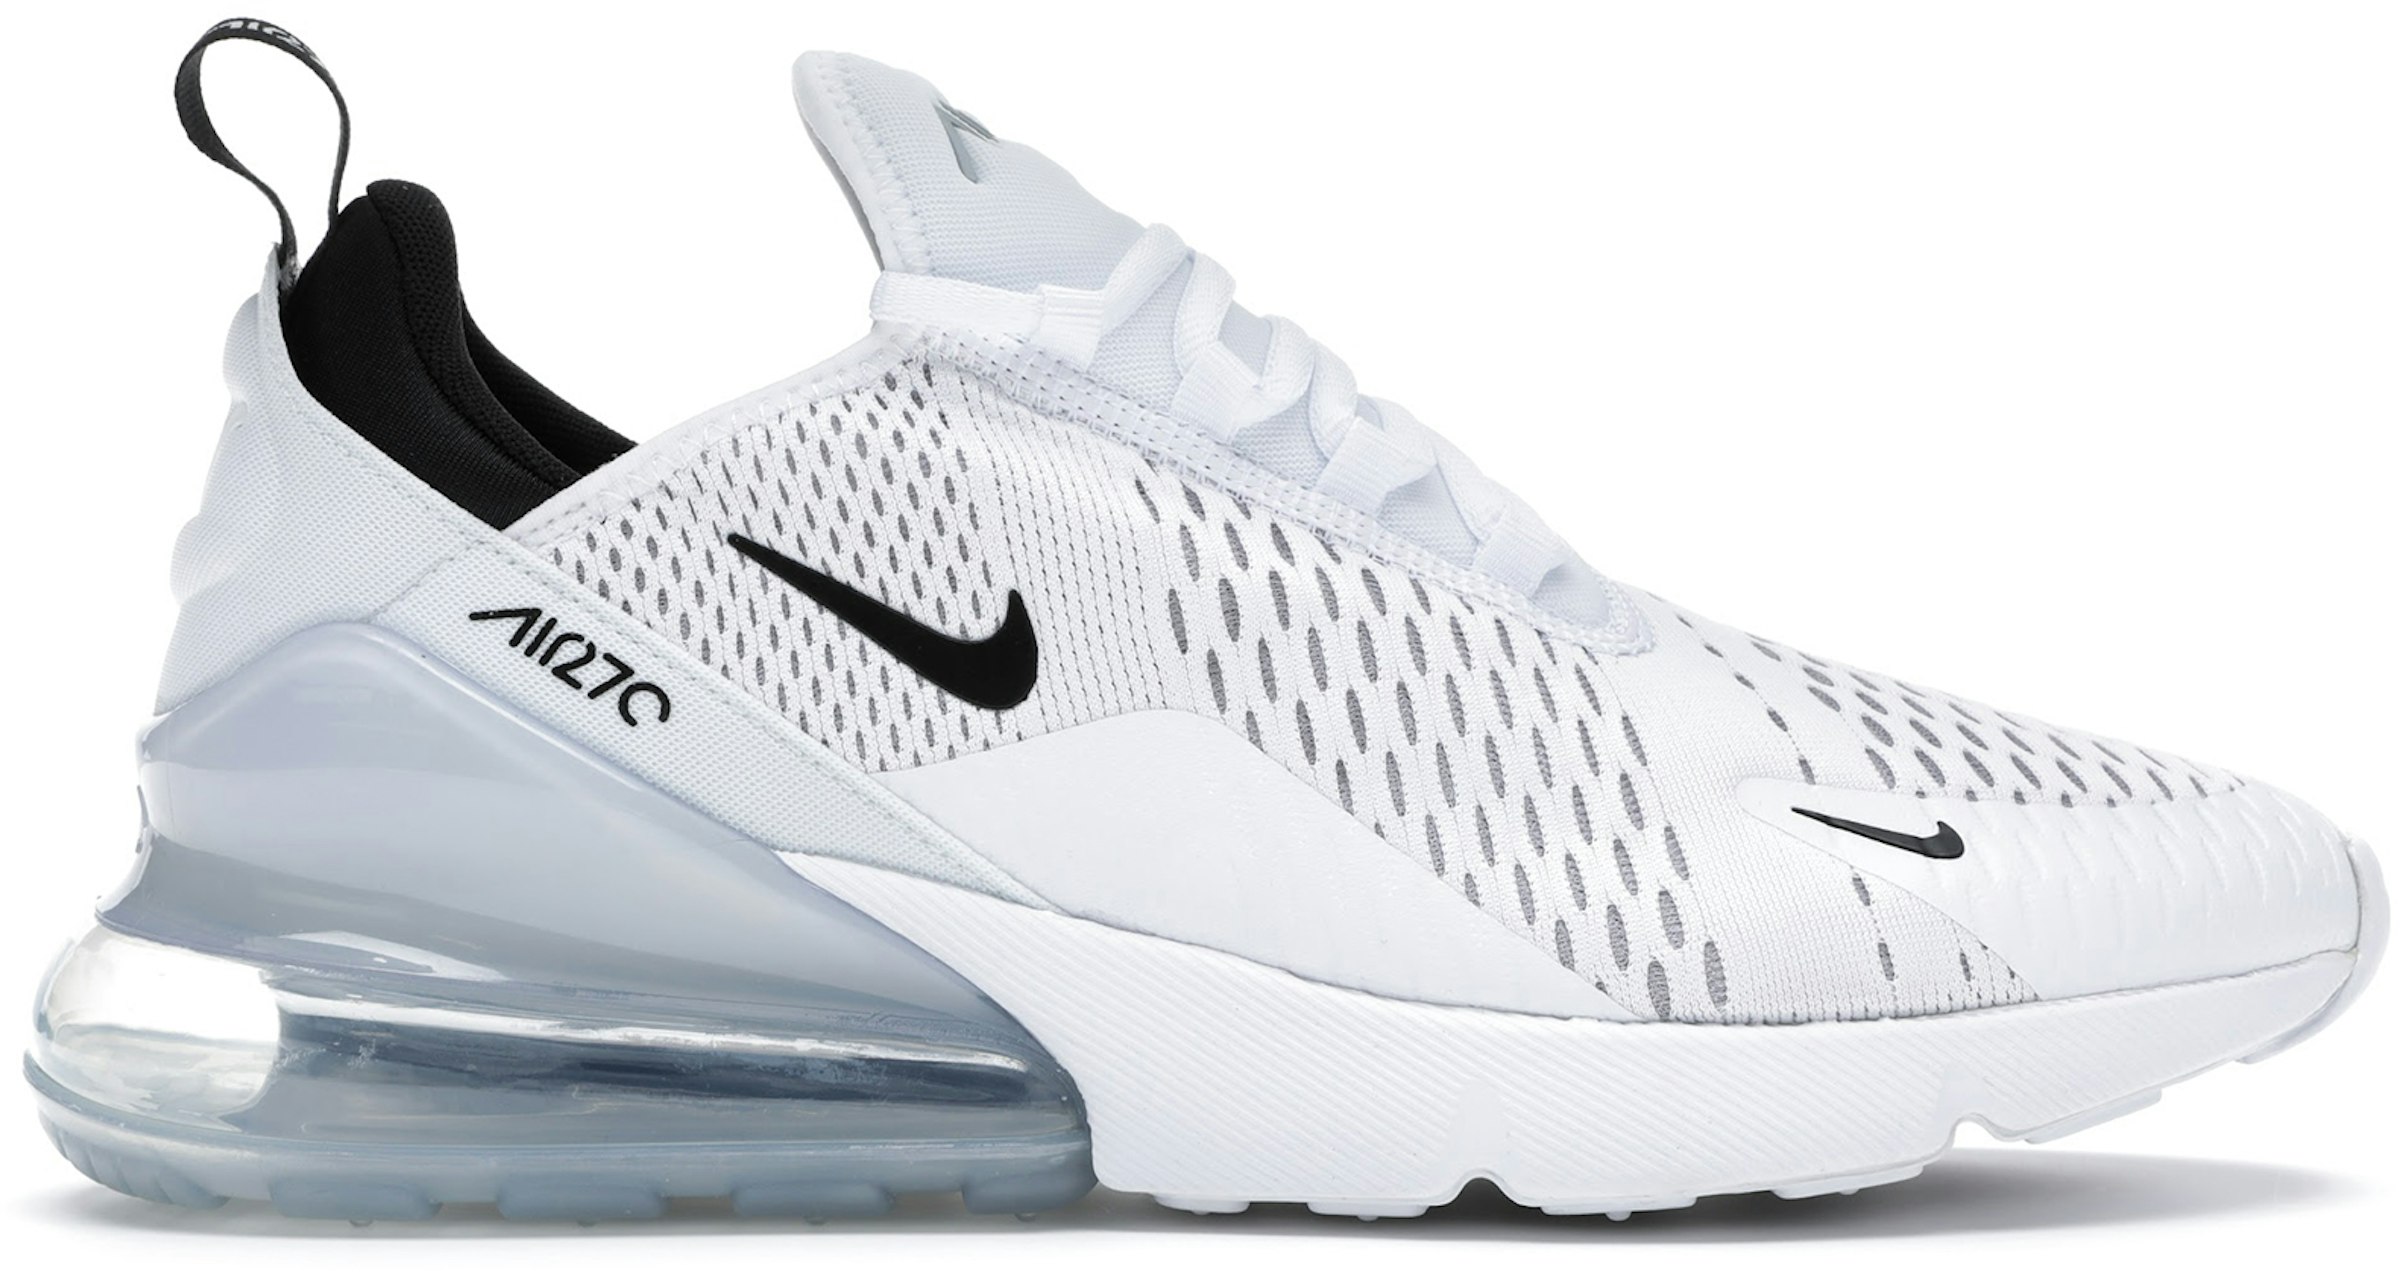 Buy Nike Max 270 Shoes & New Sneakers -